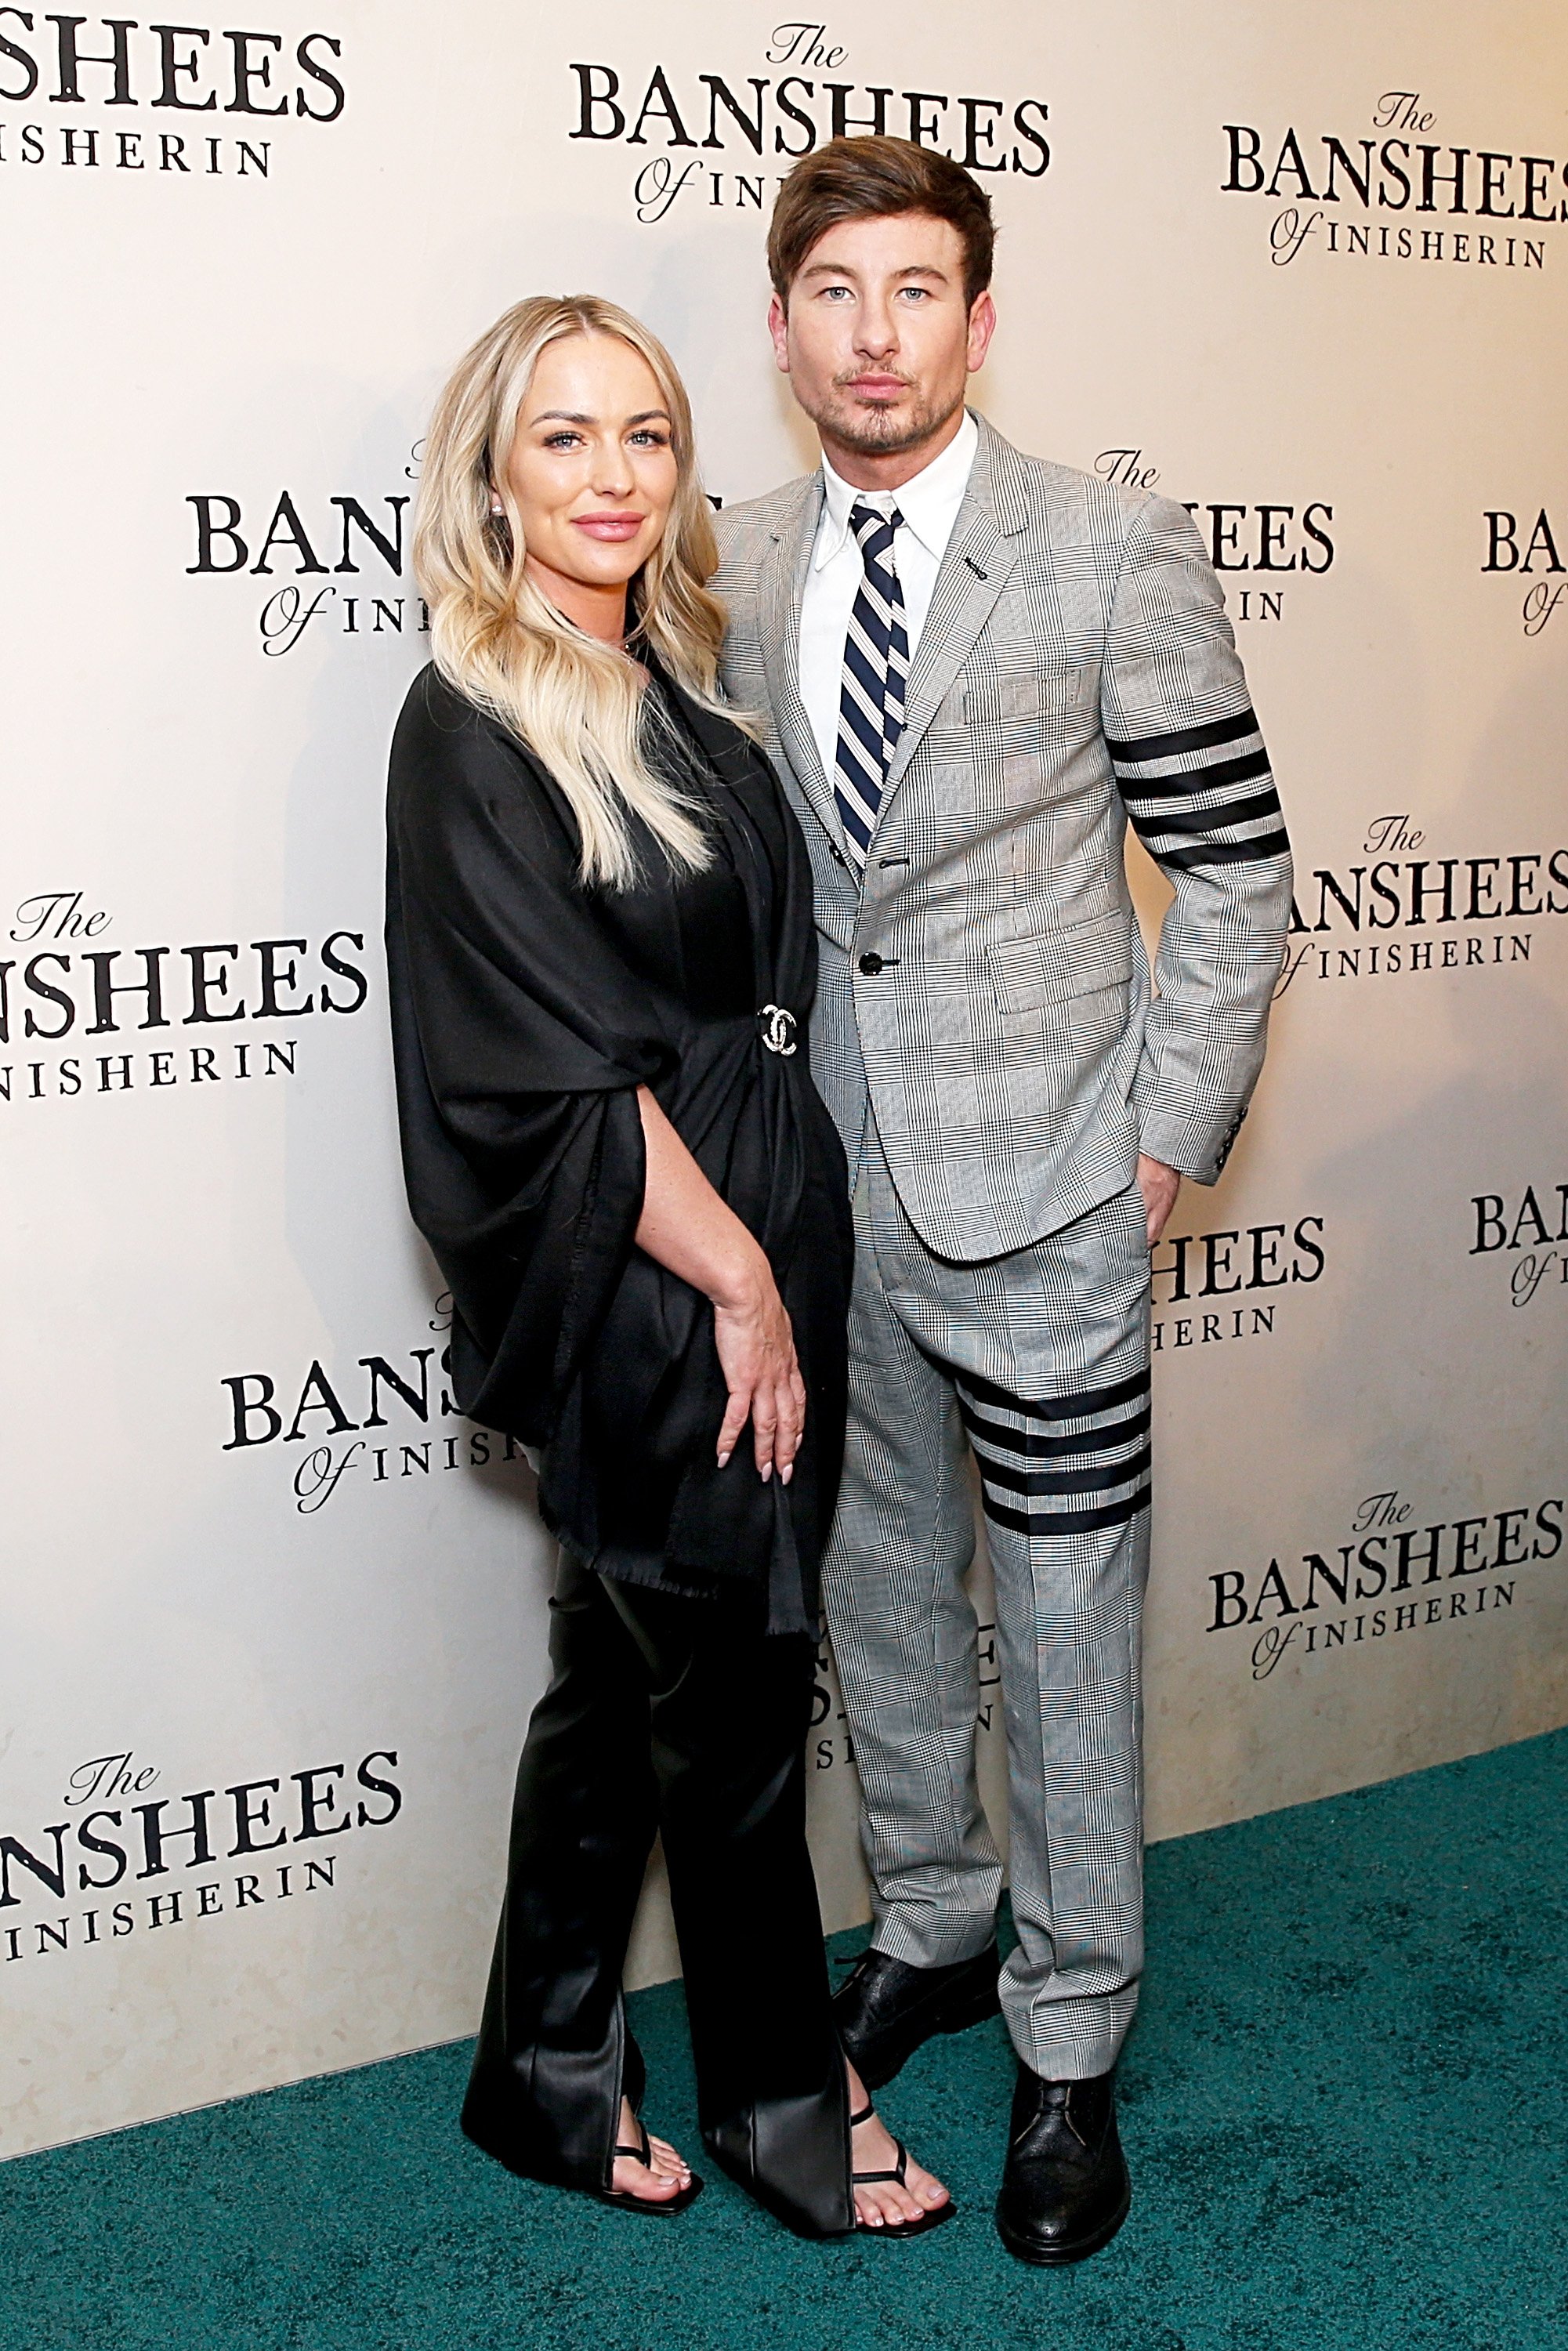 Barry Keoghan and Alyson Sandro at the screening of "The Banshees Of Inisherin" on October 10, 2022, in New York | Source: Getty Images